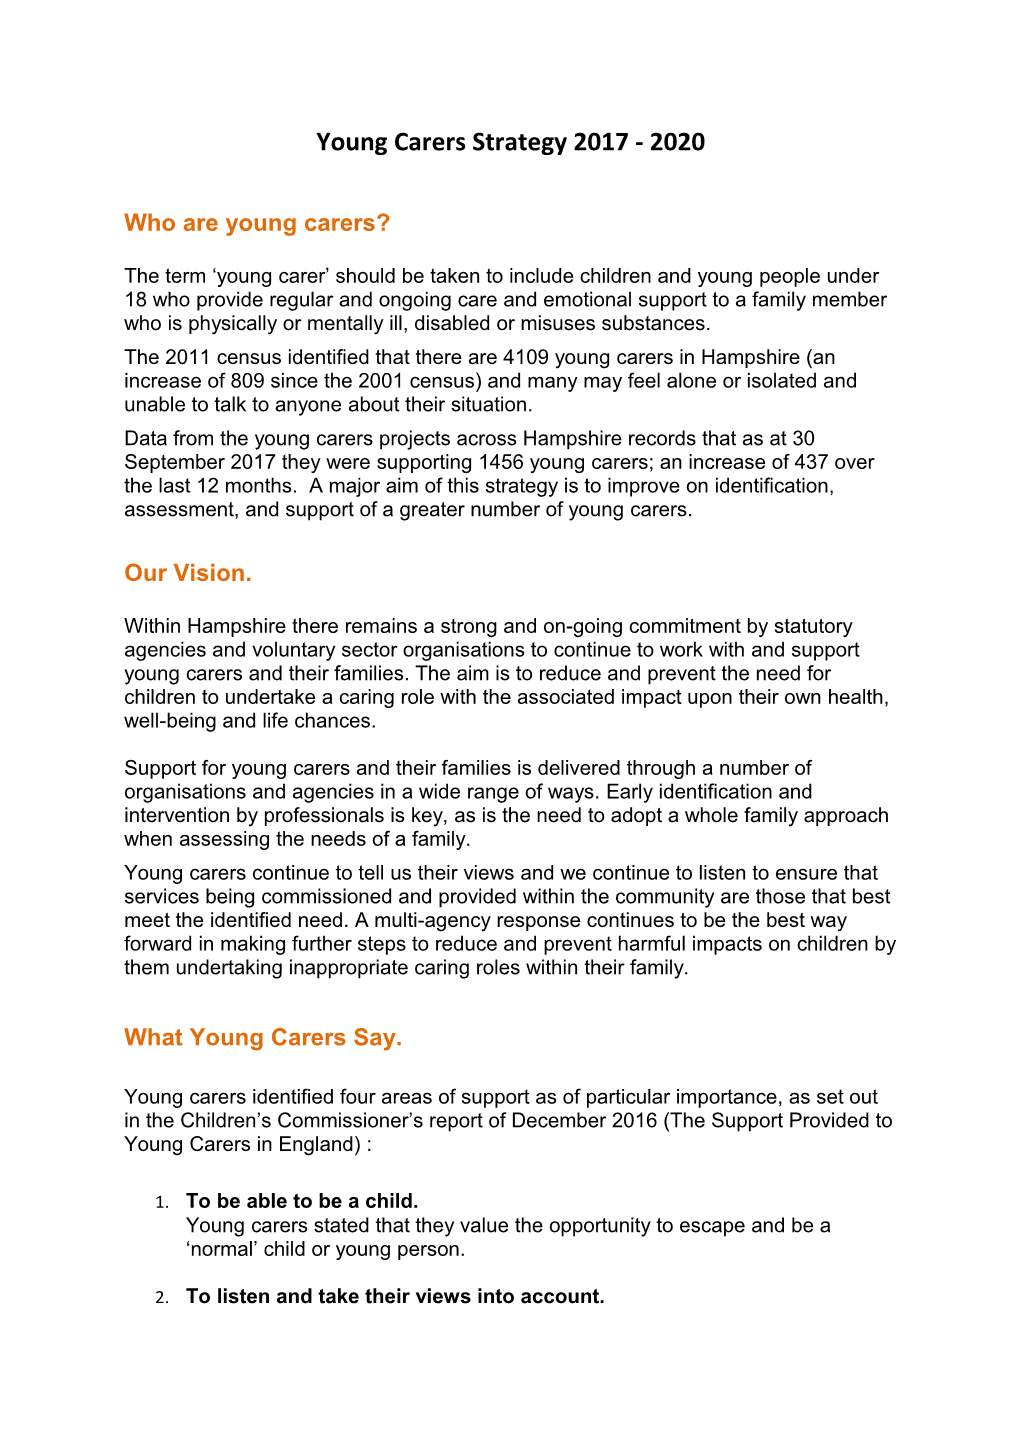 Who Are Young Carers?